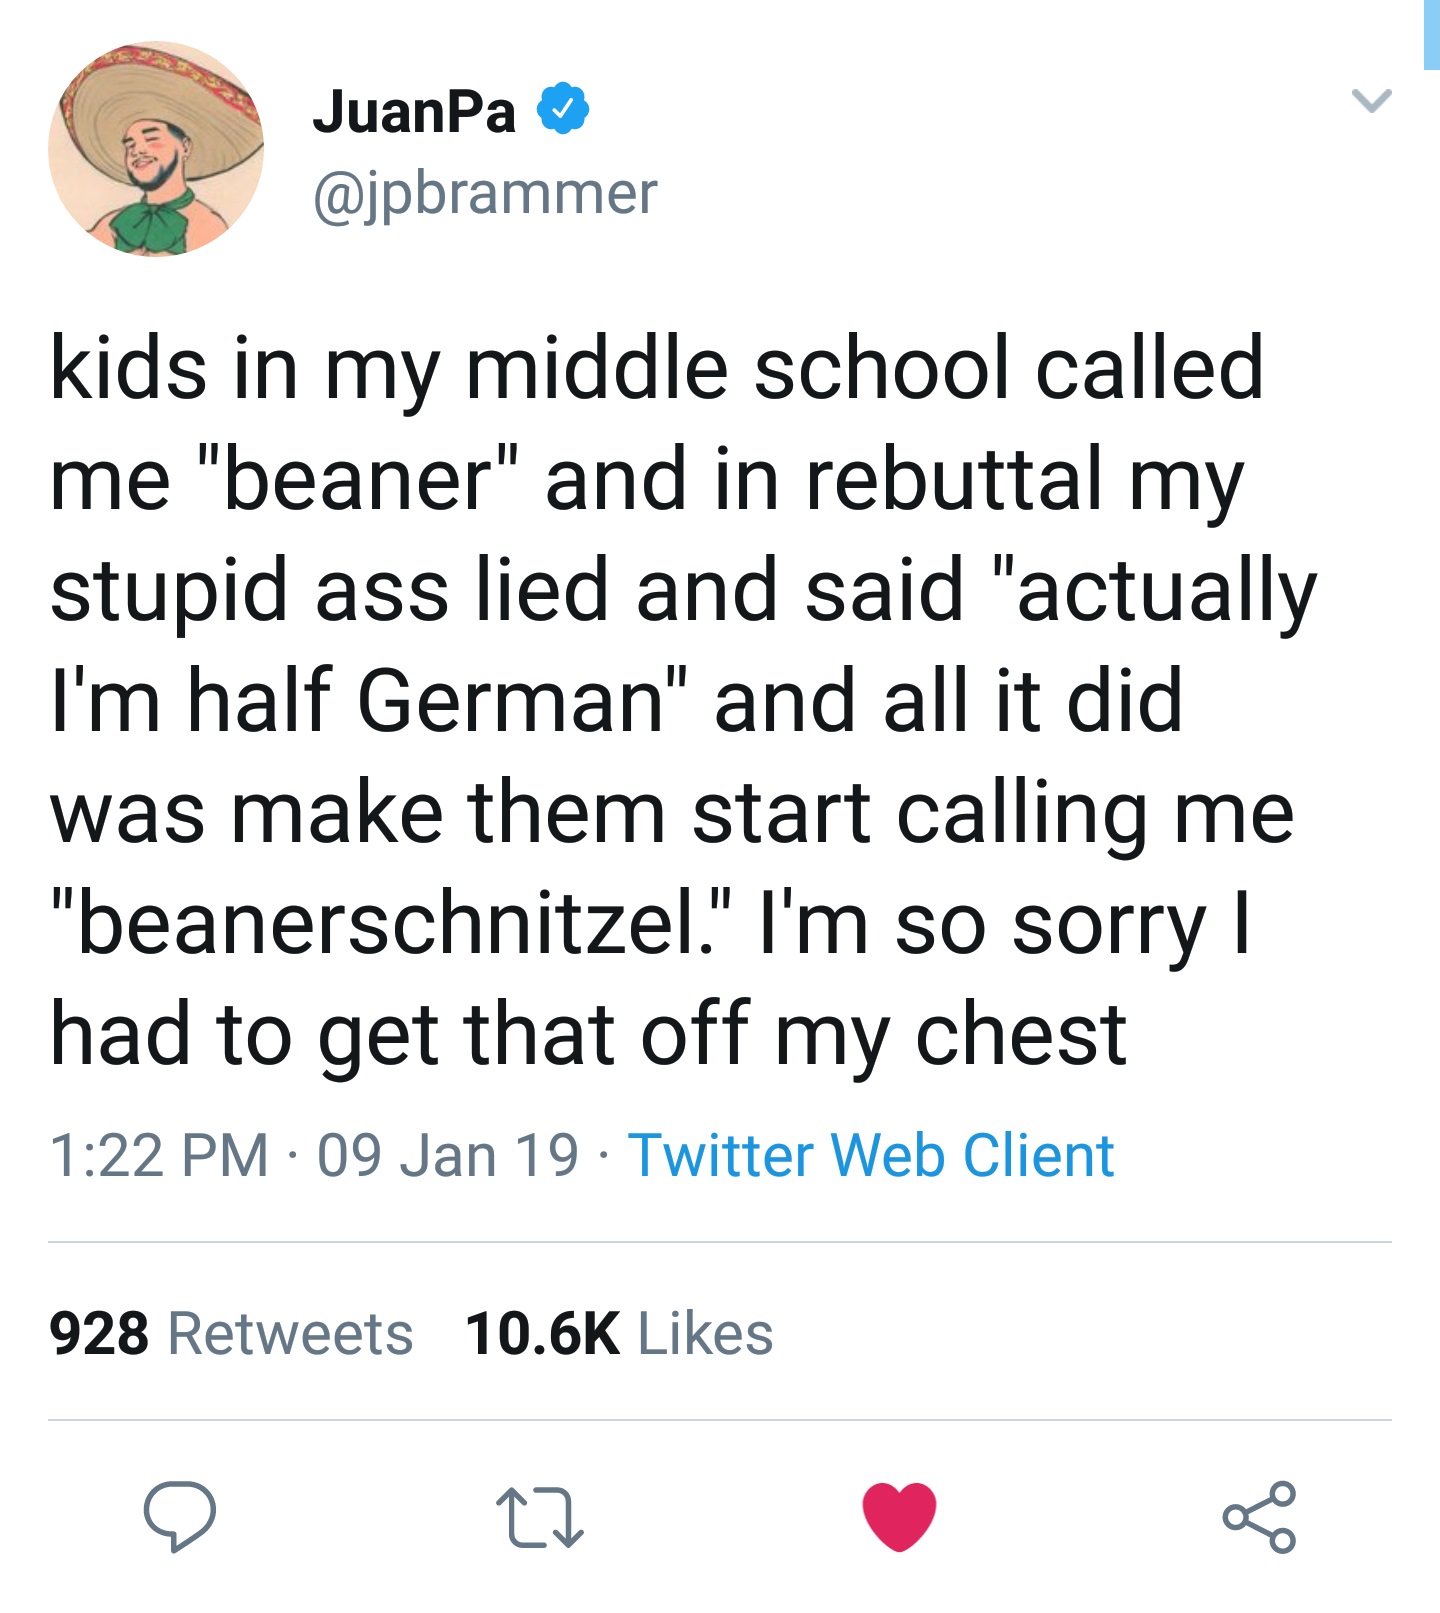 ImAllexx - JuanPa kids in my middle school called me "beaner" and in rebuttal my stupid ass lied and said "actually I'm half German" and all it did was make them start calling me "beanerschnitzel." I'm so sorry | had to get that off my chest 09 Jan 19 Twi